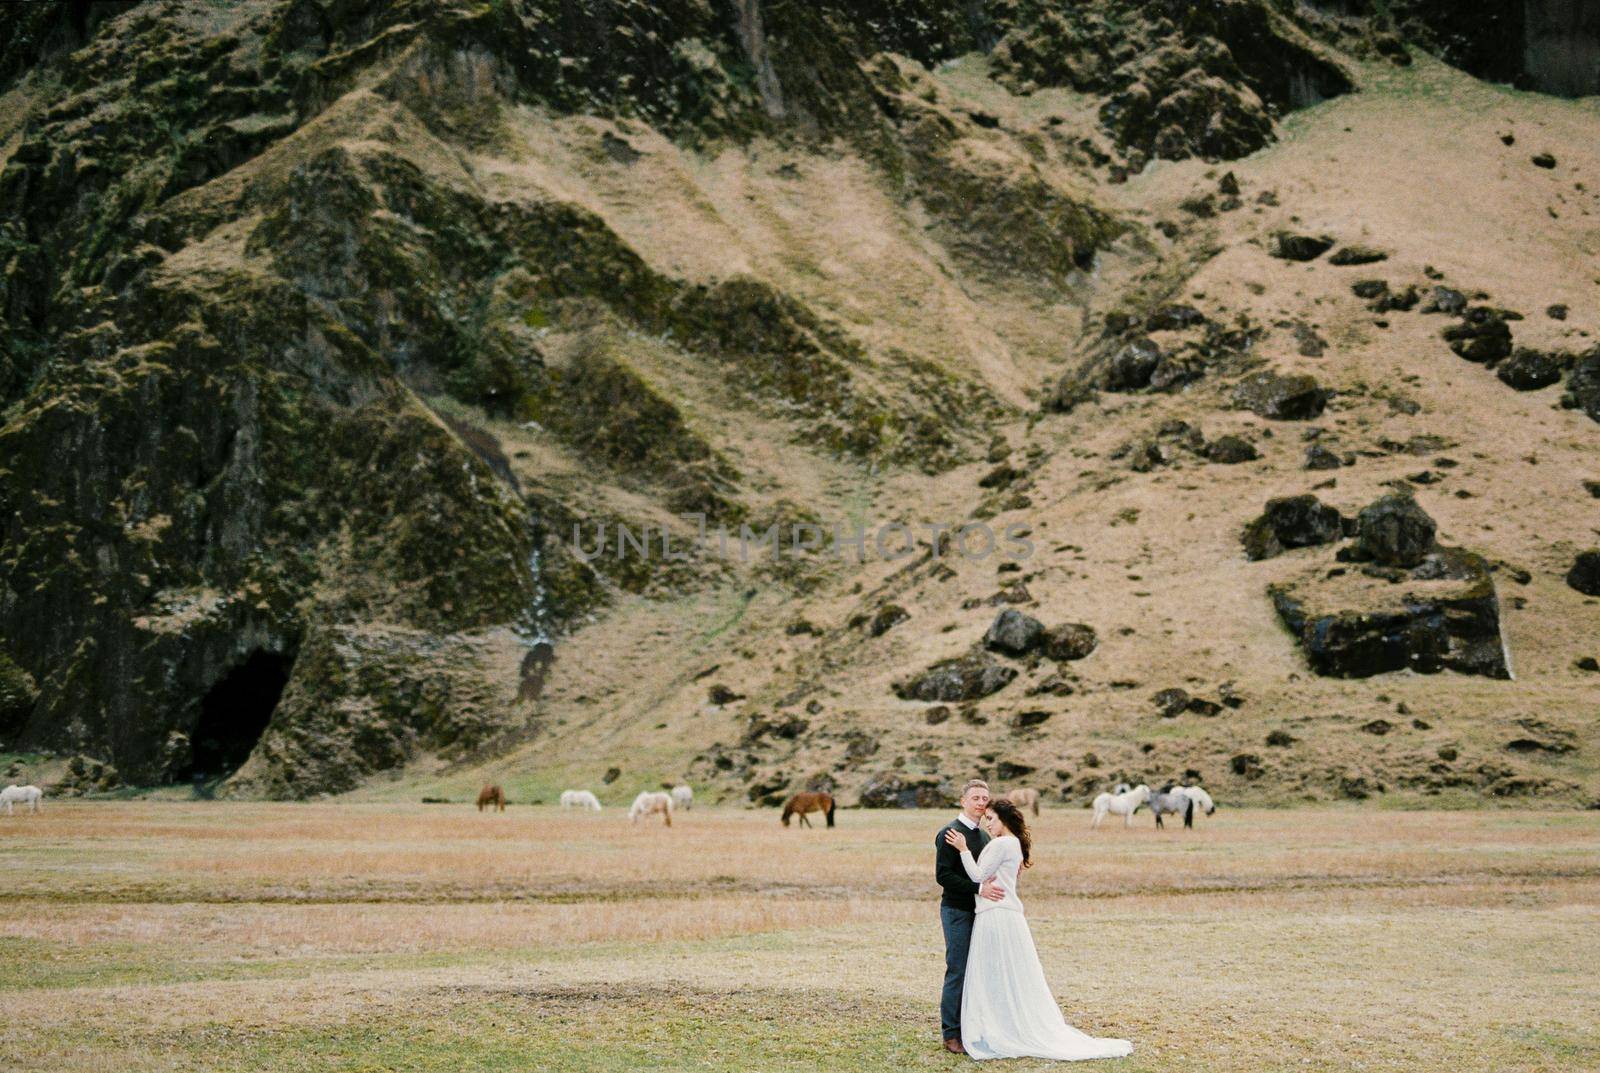 Groom hugs bride against the backdrop of horses grazing at the foot of the mountain. Iceland. High quality photo